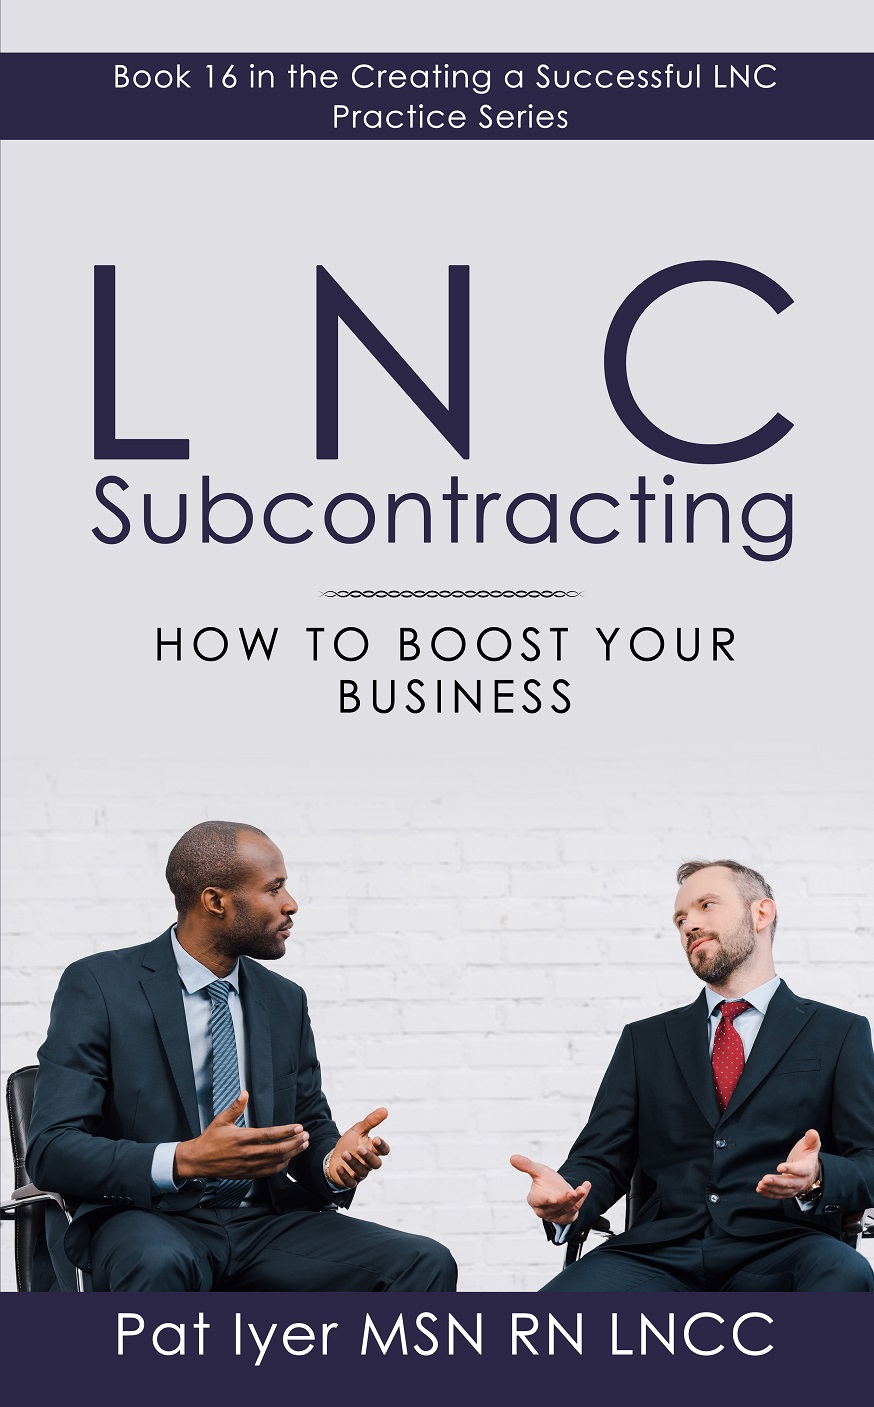 Subcontracting kindle small